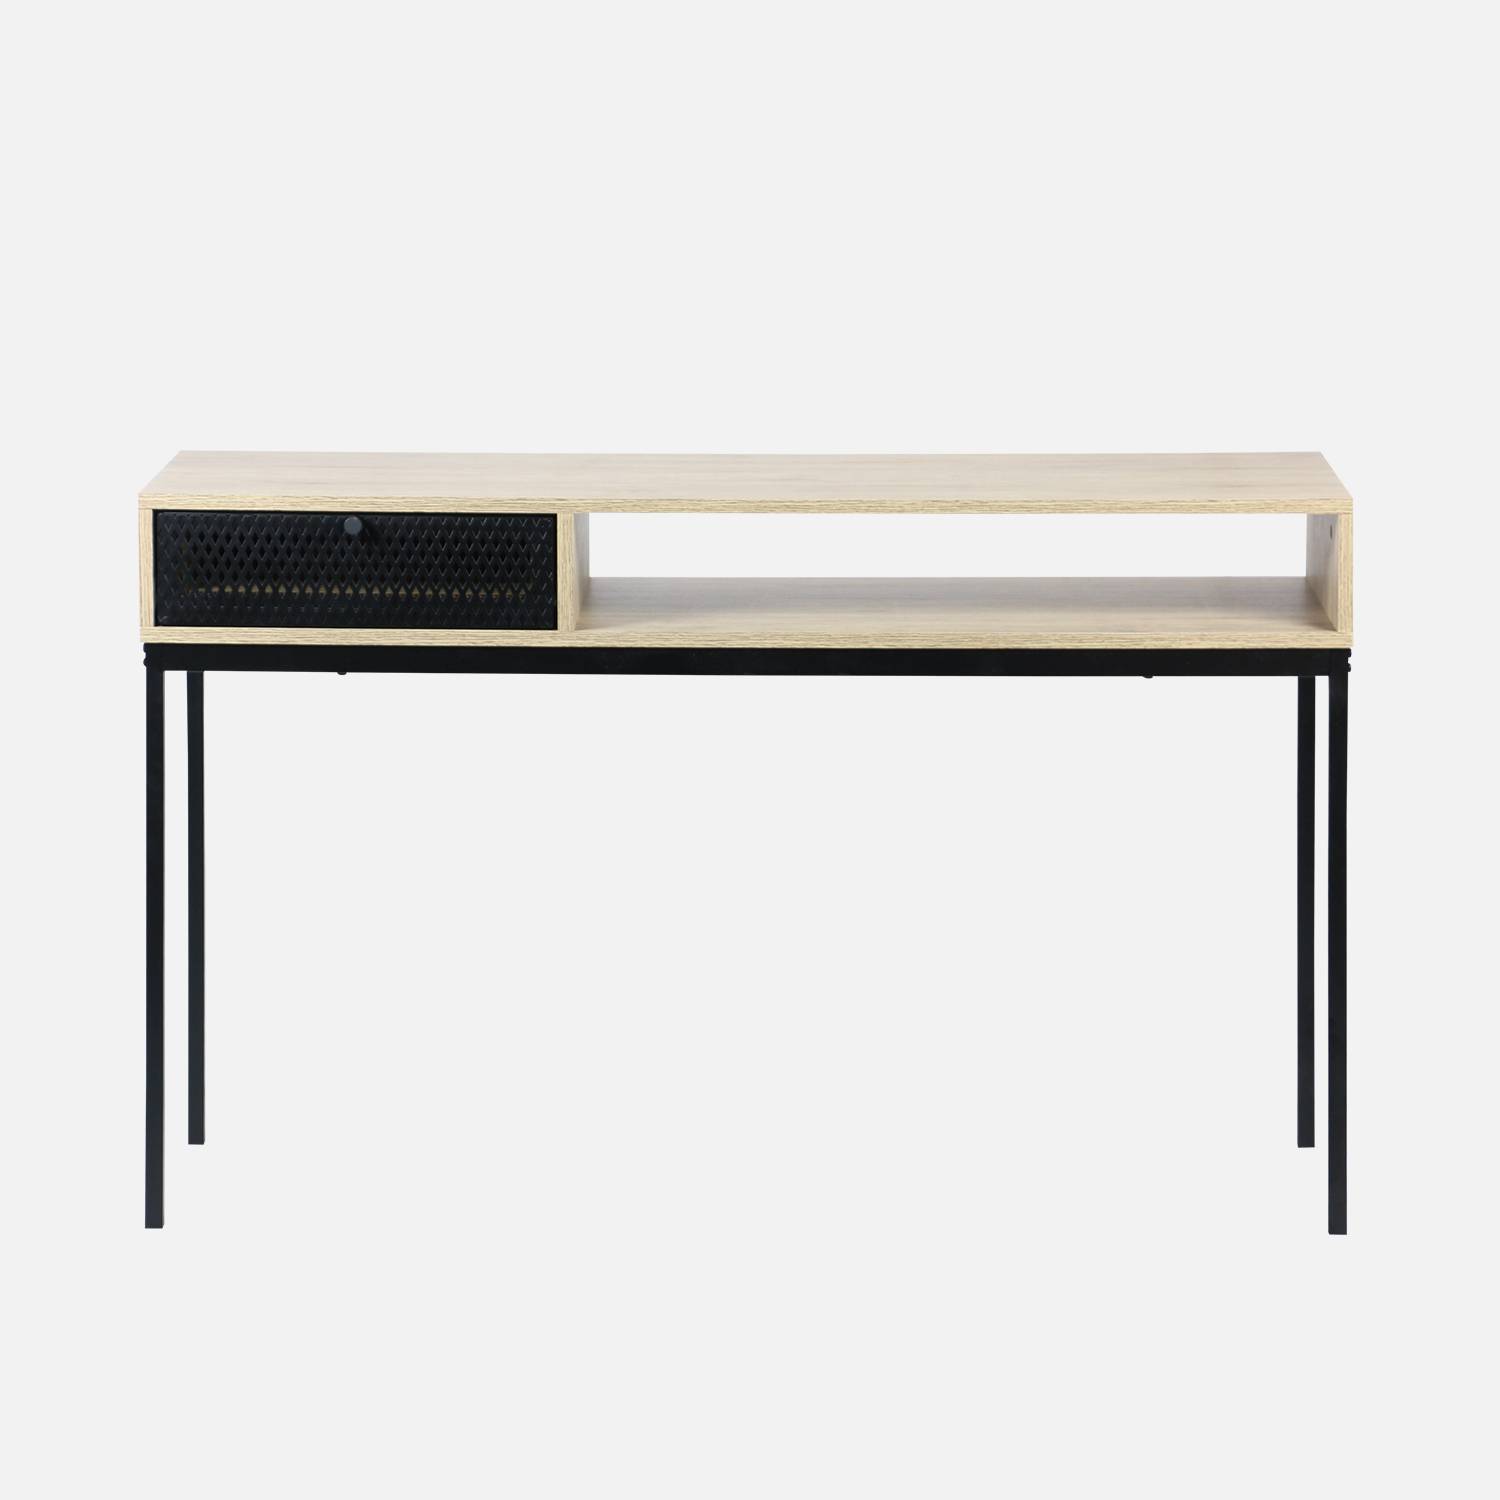 120cm Metal and wood-style hallway console table with storage nook, drawer & industrial metal legs - Brooklyn,sweeek,Photo4